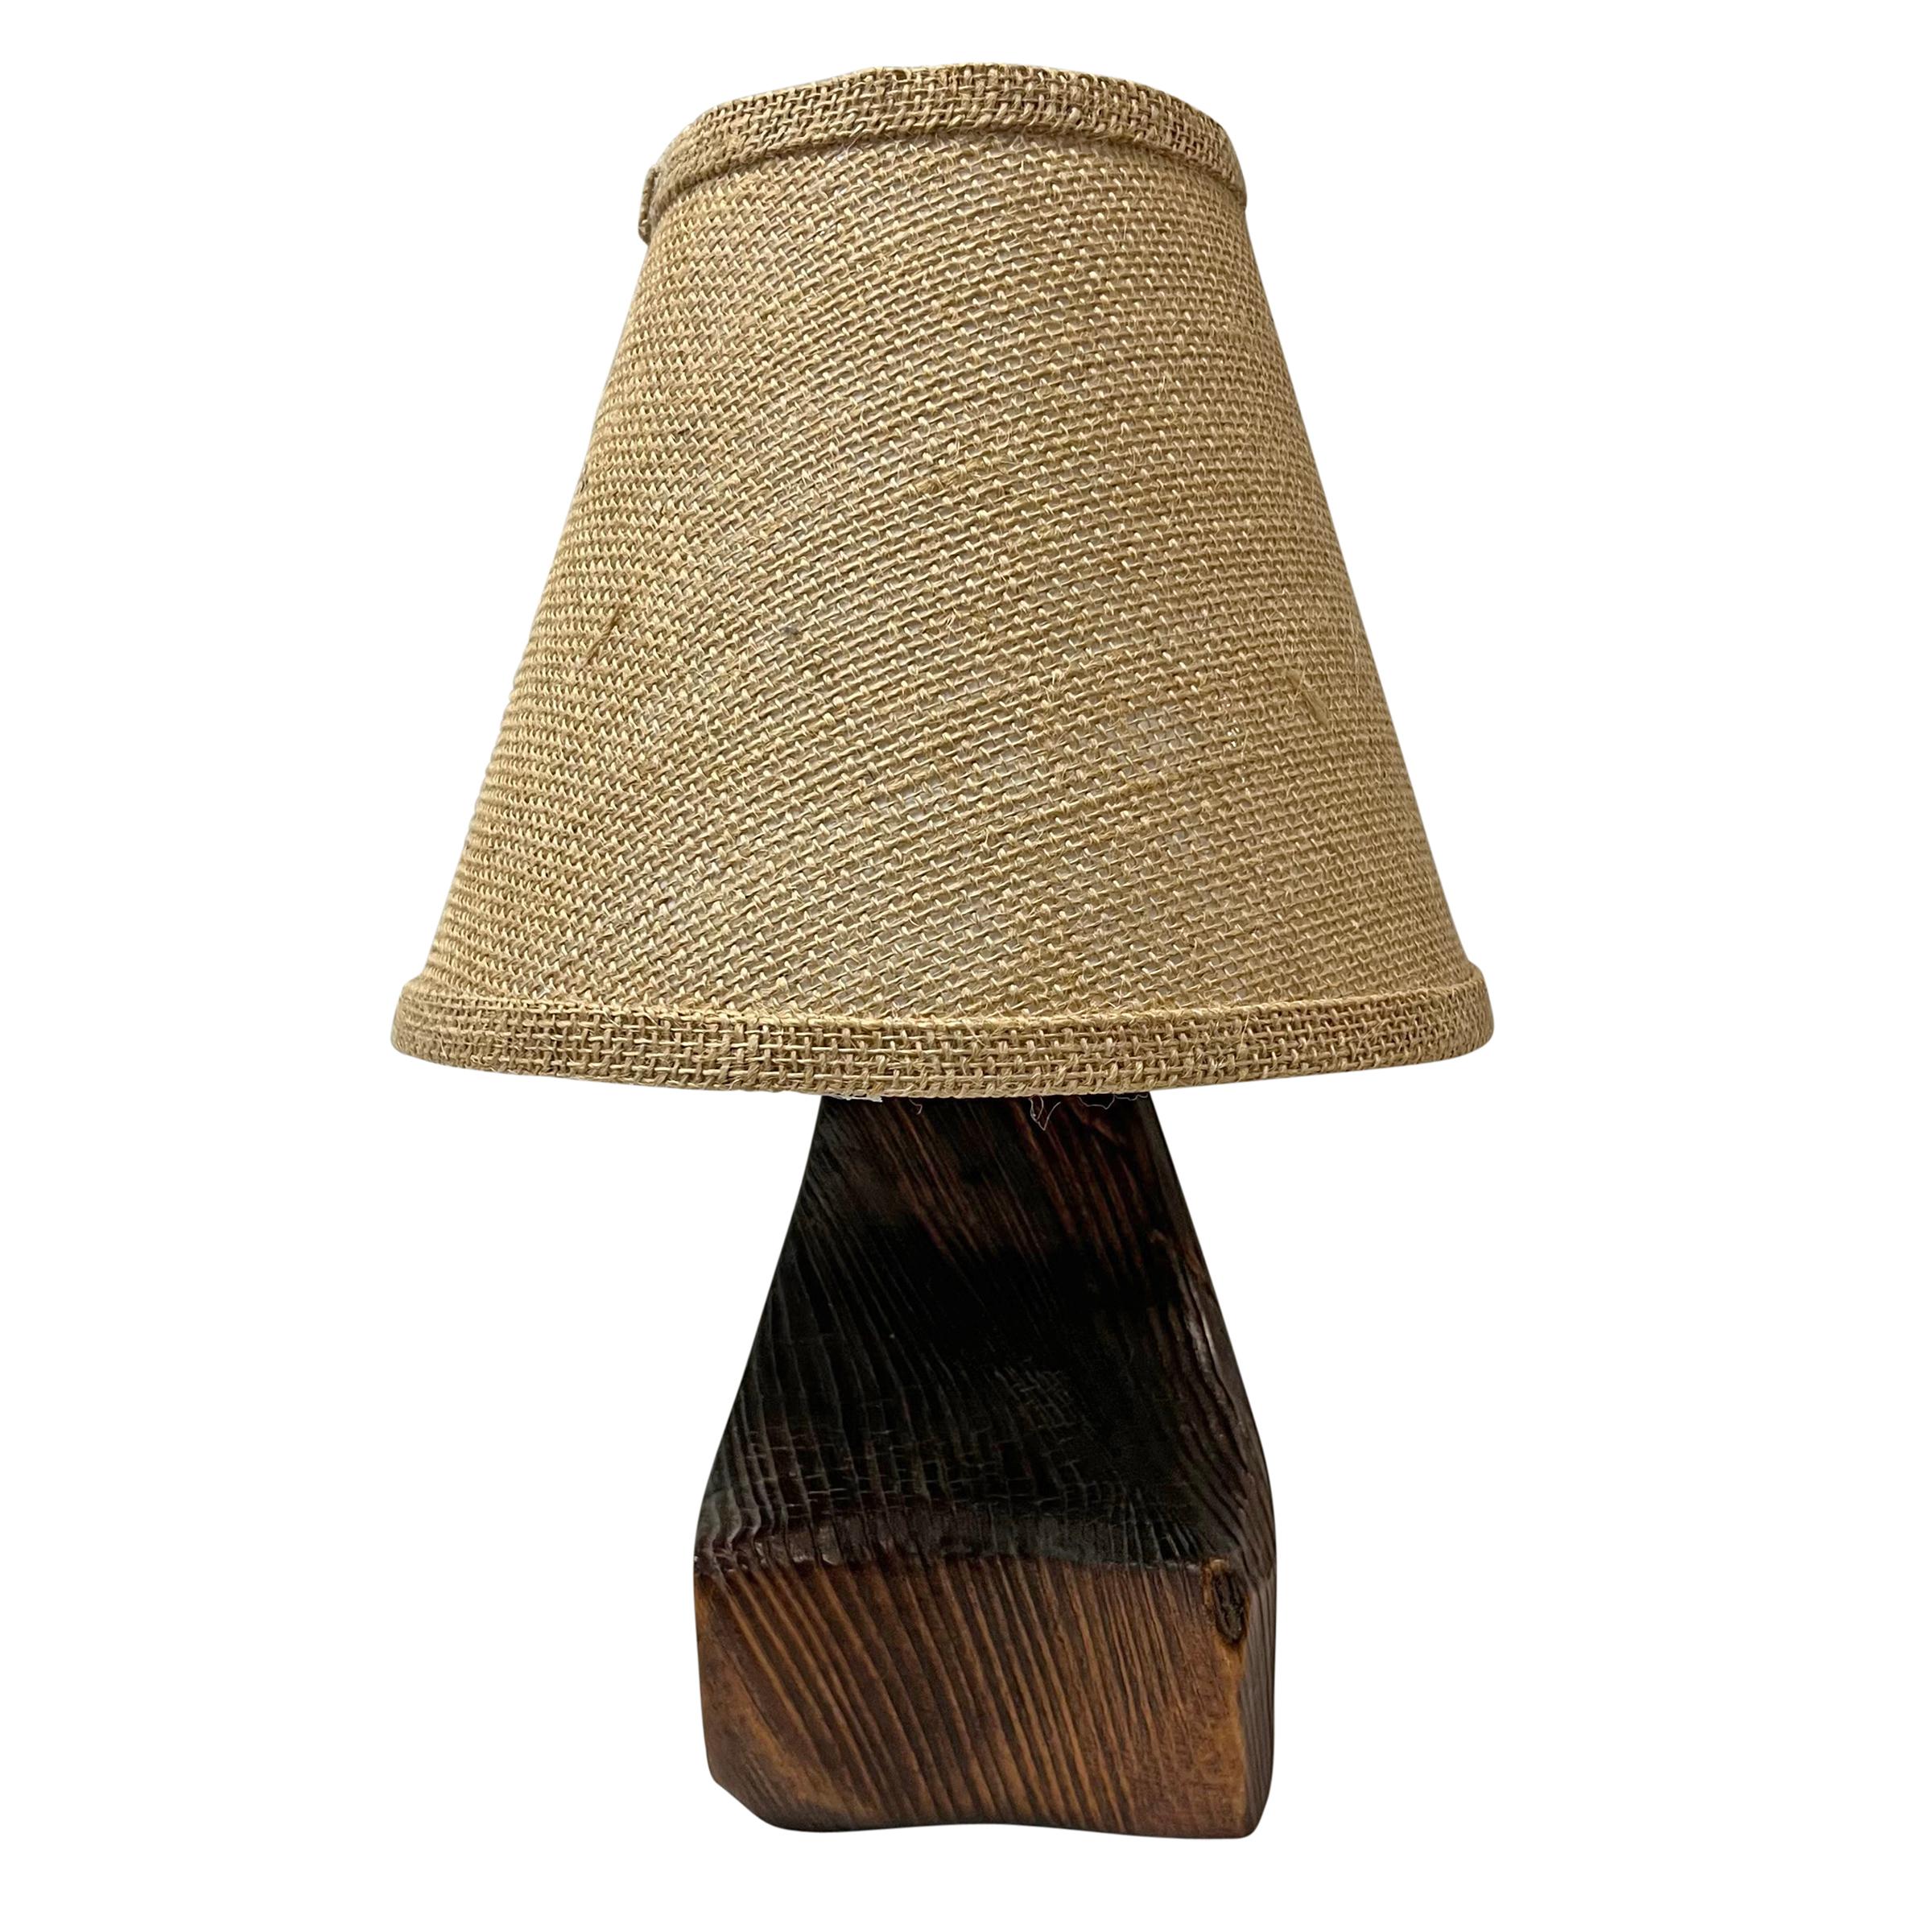 Mid-20th Century French Modernist Wood Lamp For Sale